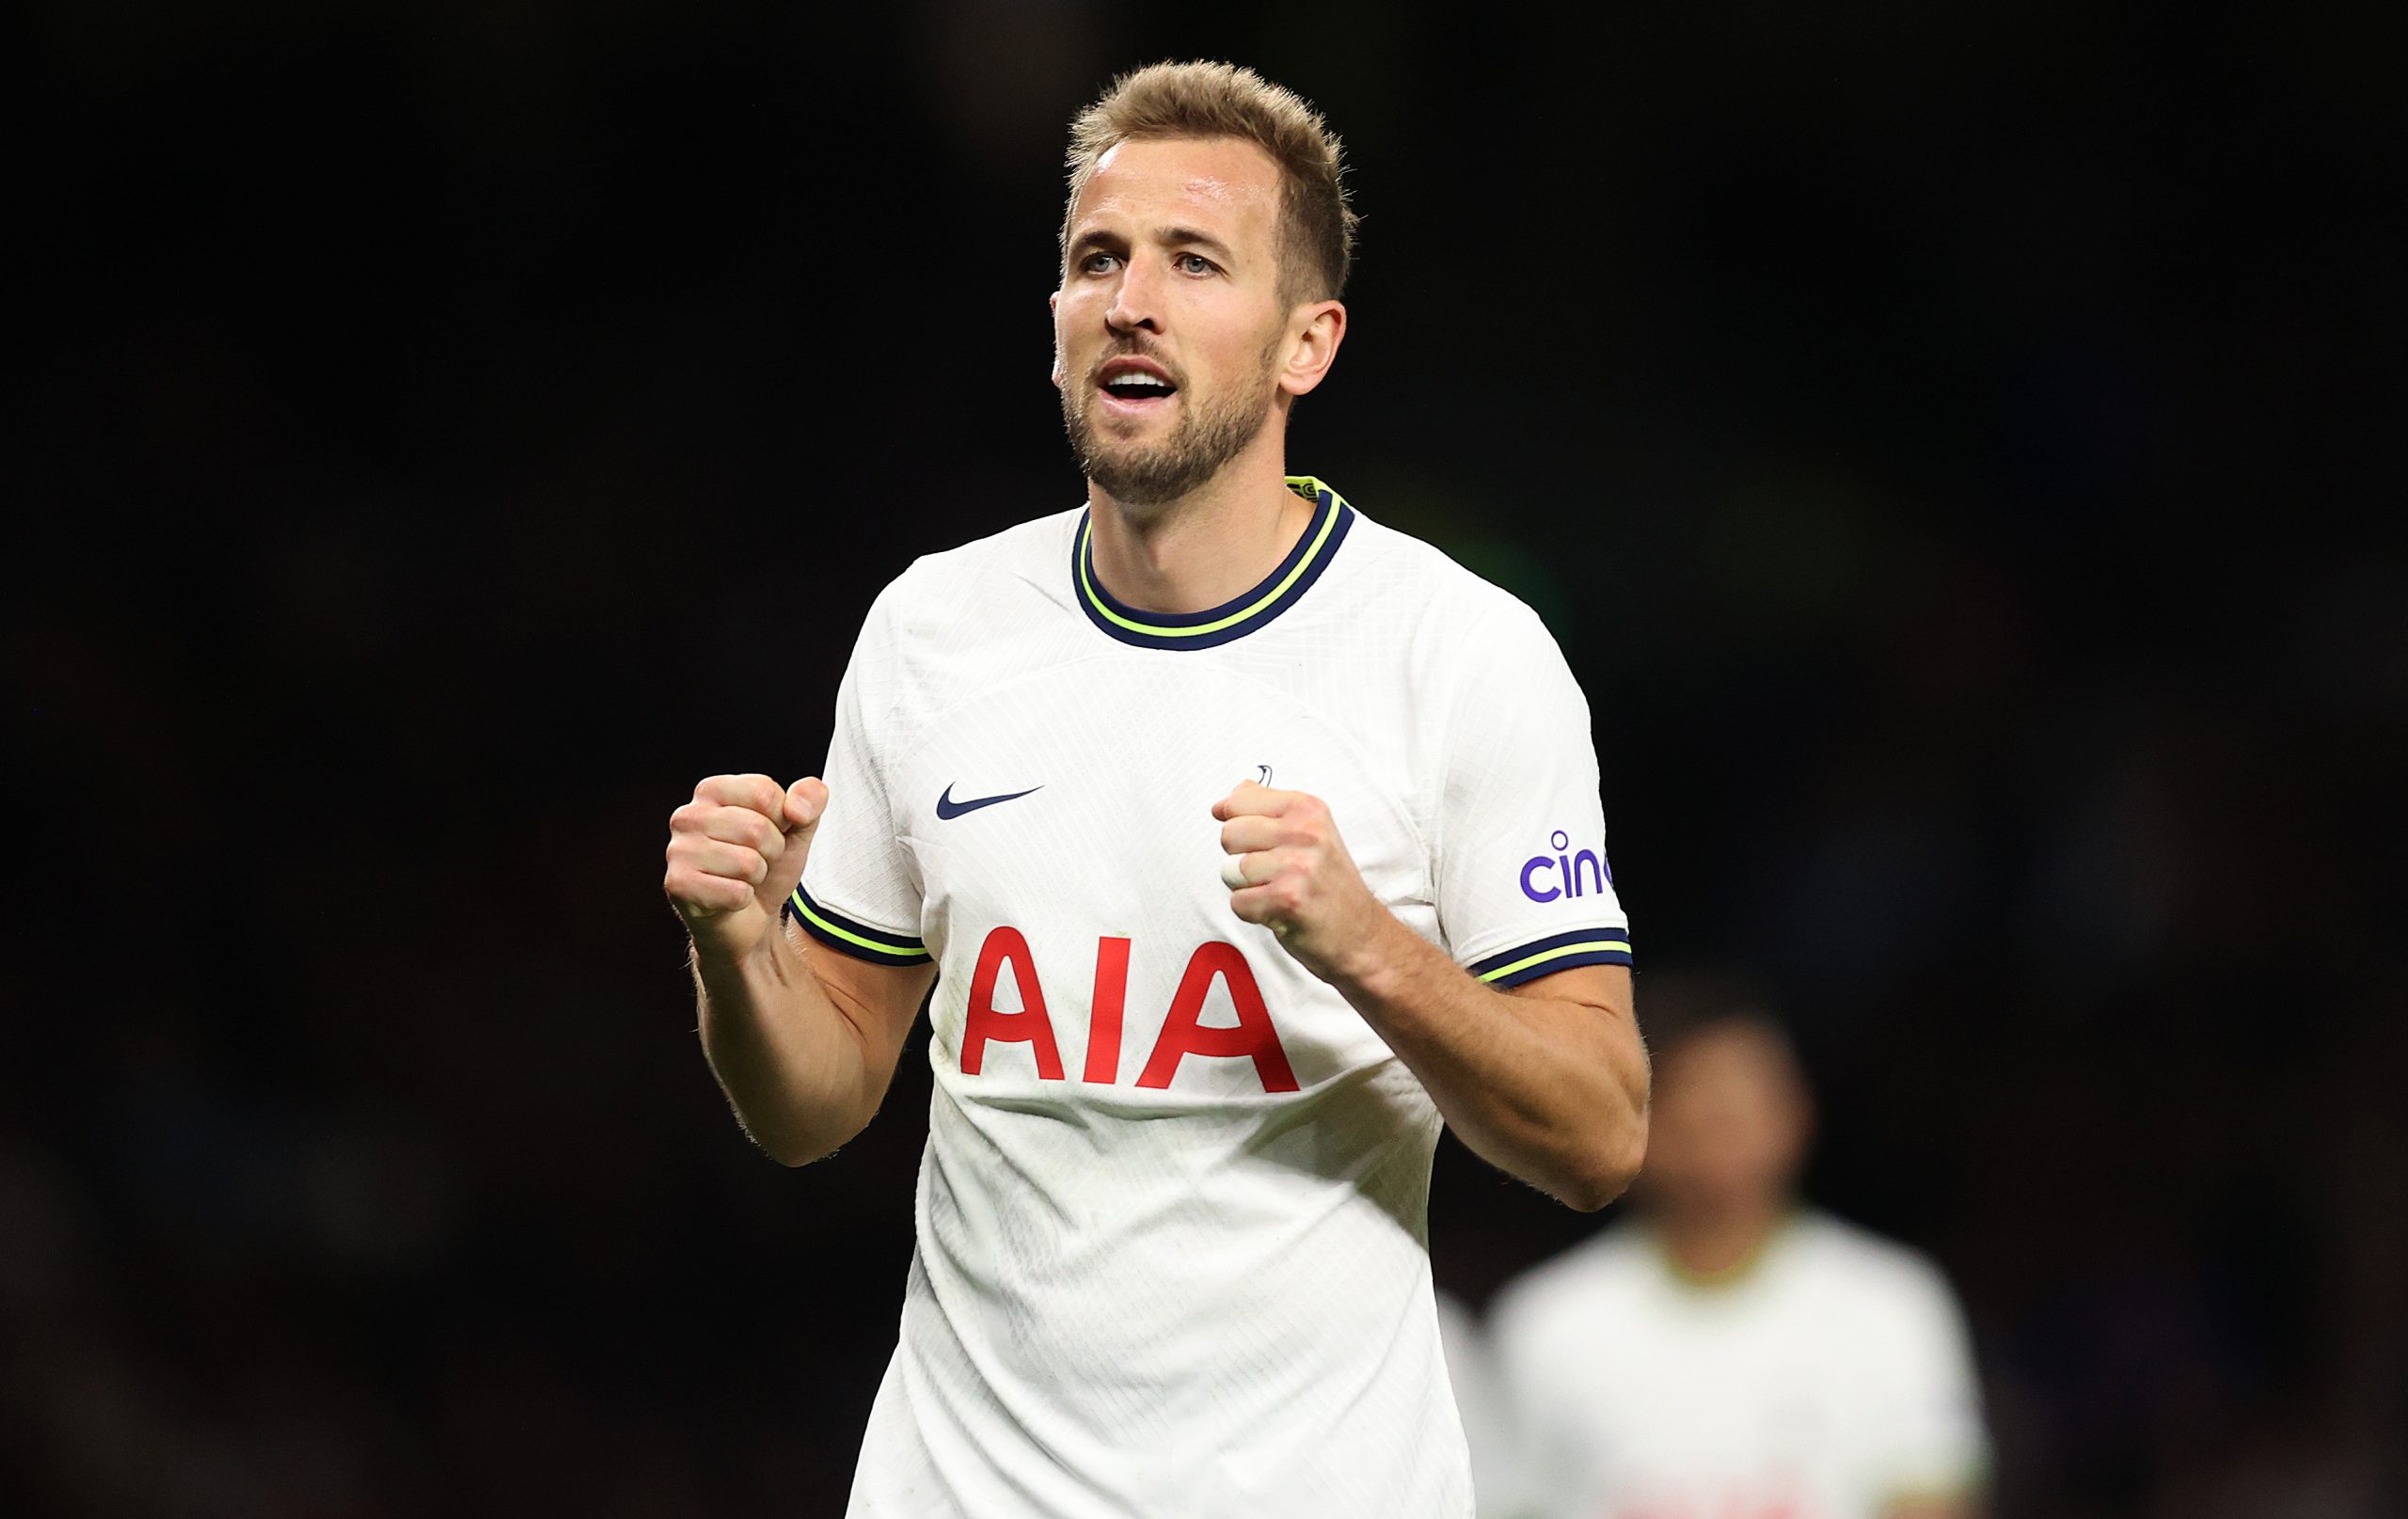 Graeme Souness says Harry Kane is the only 'world-class' English player in Qatar.